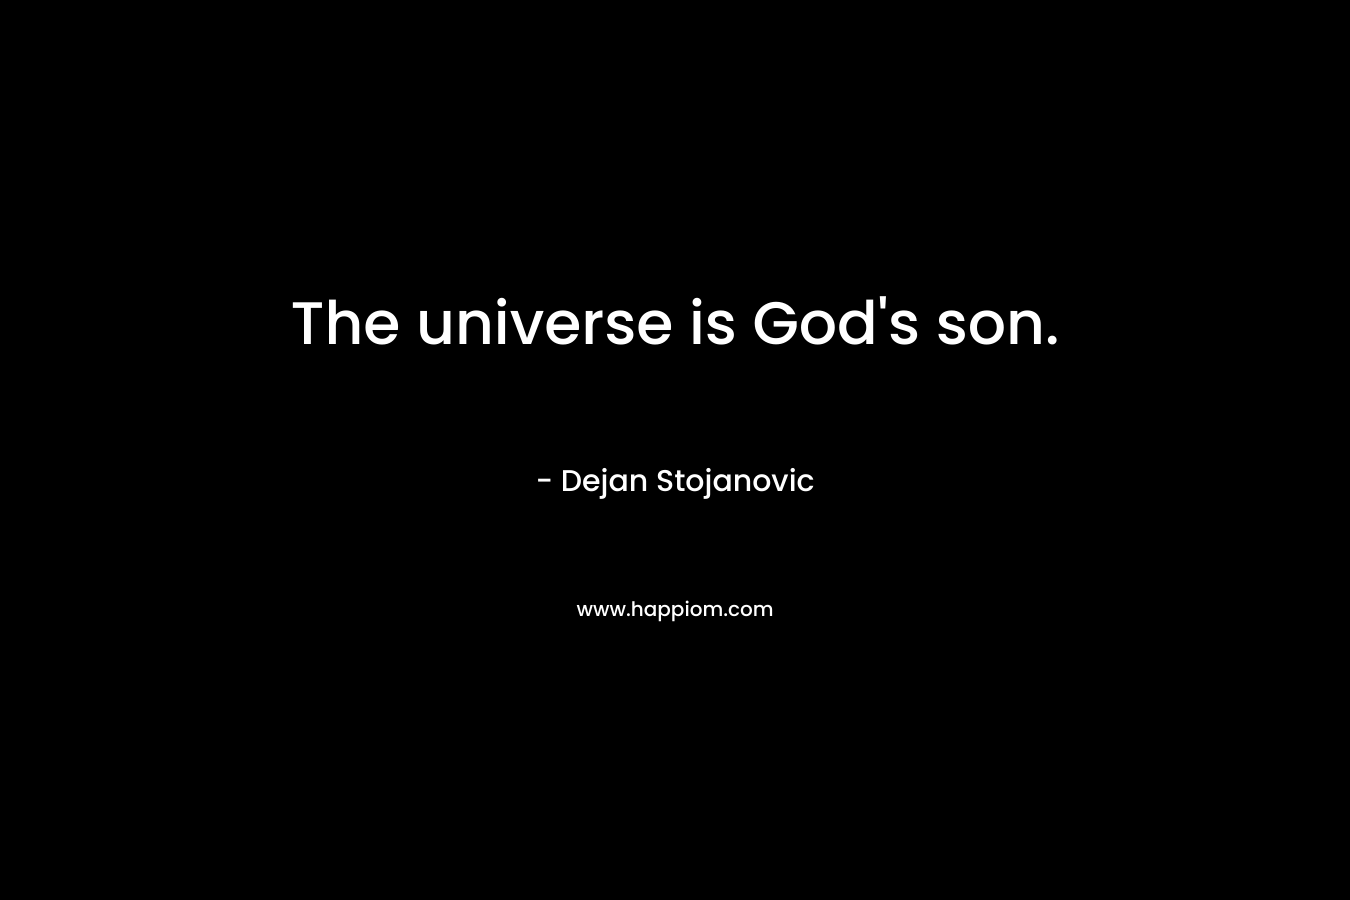 The universe is God's son.